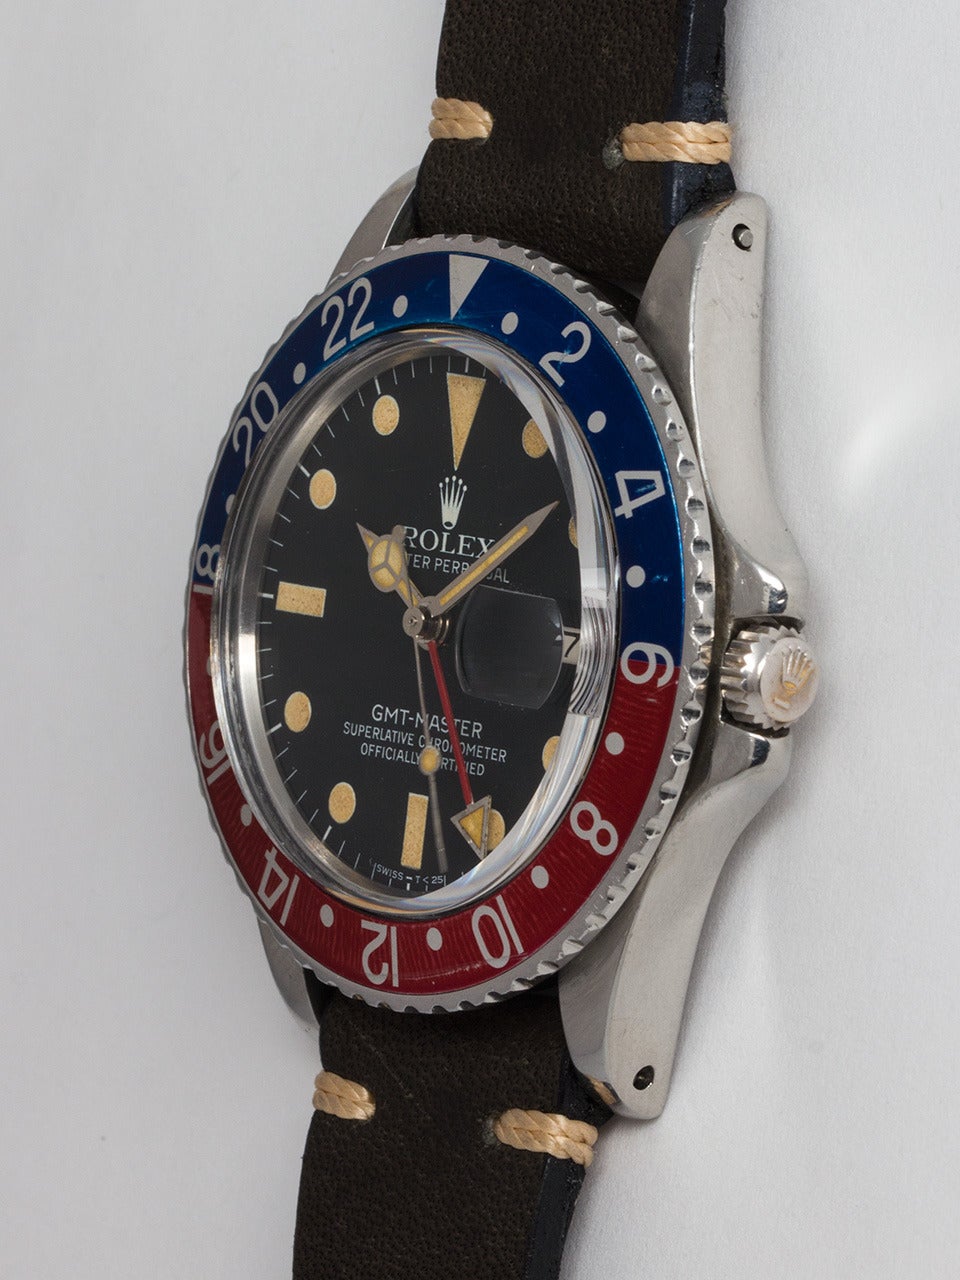 Rolex Stainless Steel GMT-Master Chronometer Wristwatch Ref 16750 In Good Condition In West Hollywood, CA